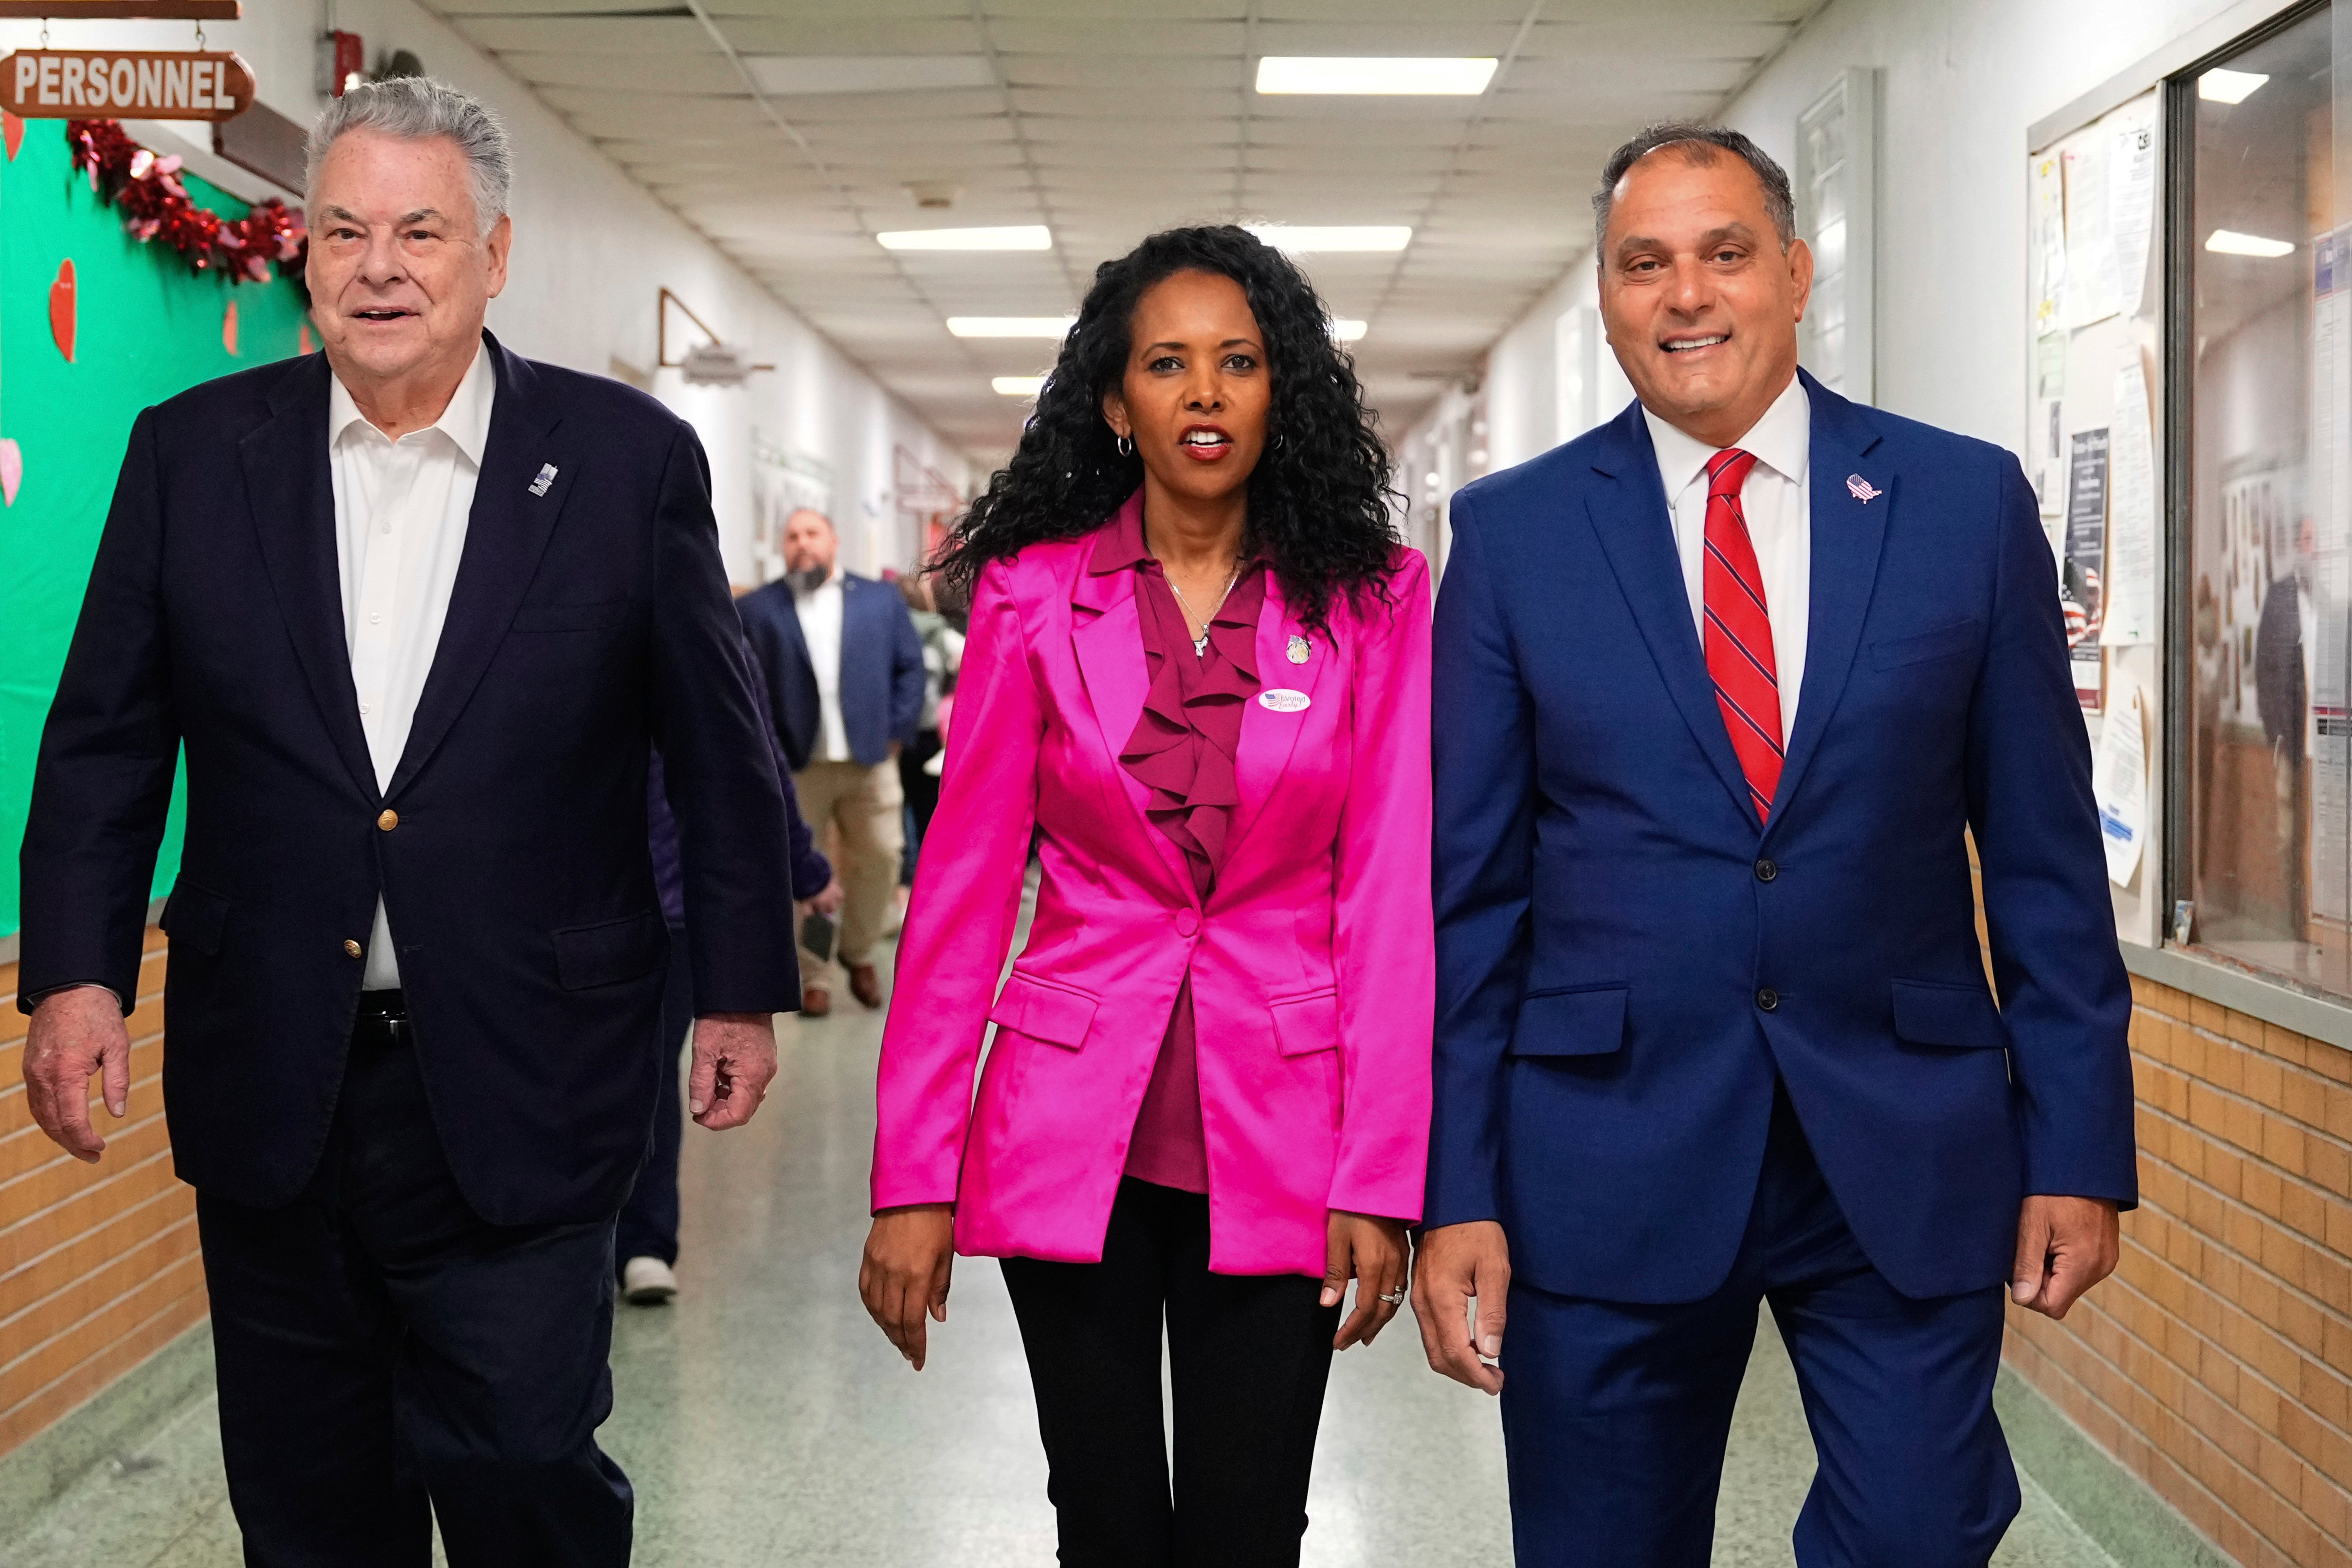 Mazi Pilip, centre, arrives to vote early at a polling station in Massapequa, New York, on Friday with former GOP congressman Peter King and Oyster Bay town supervisor Joseph Saladino